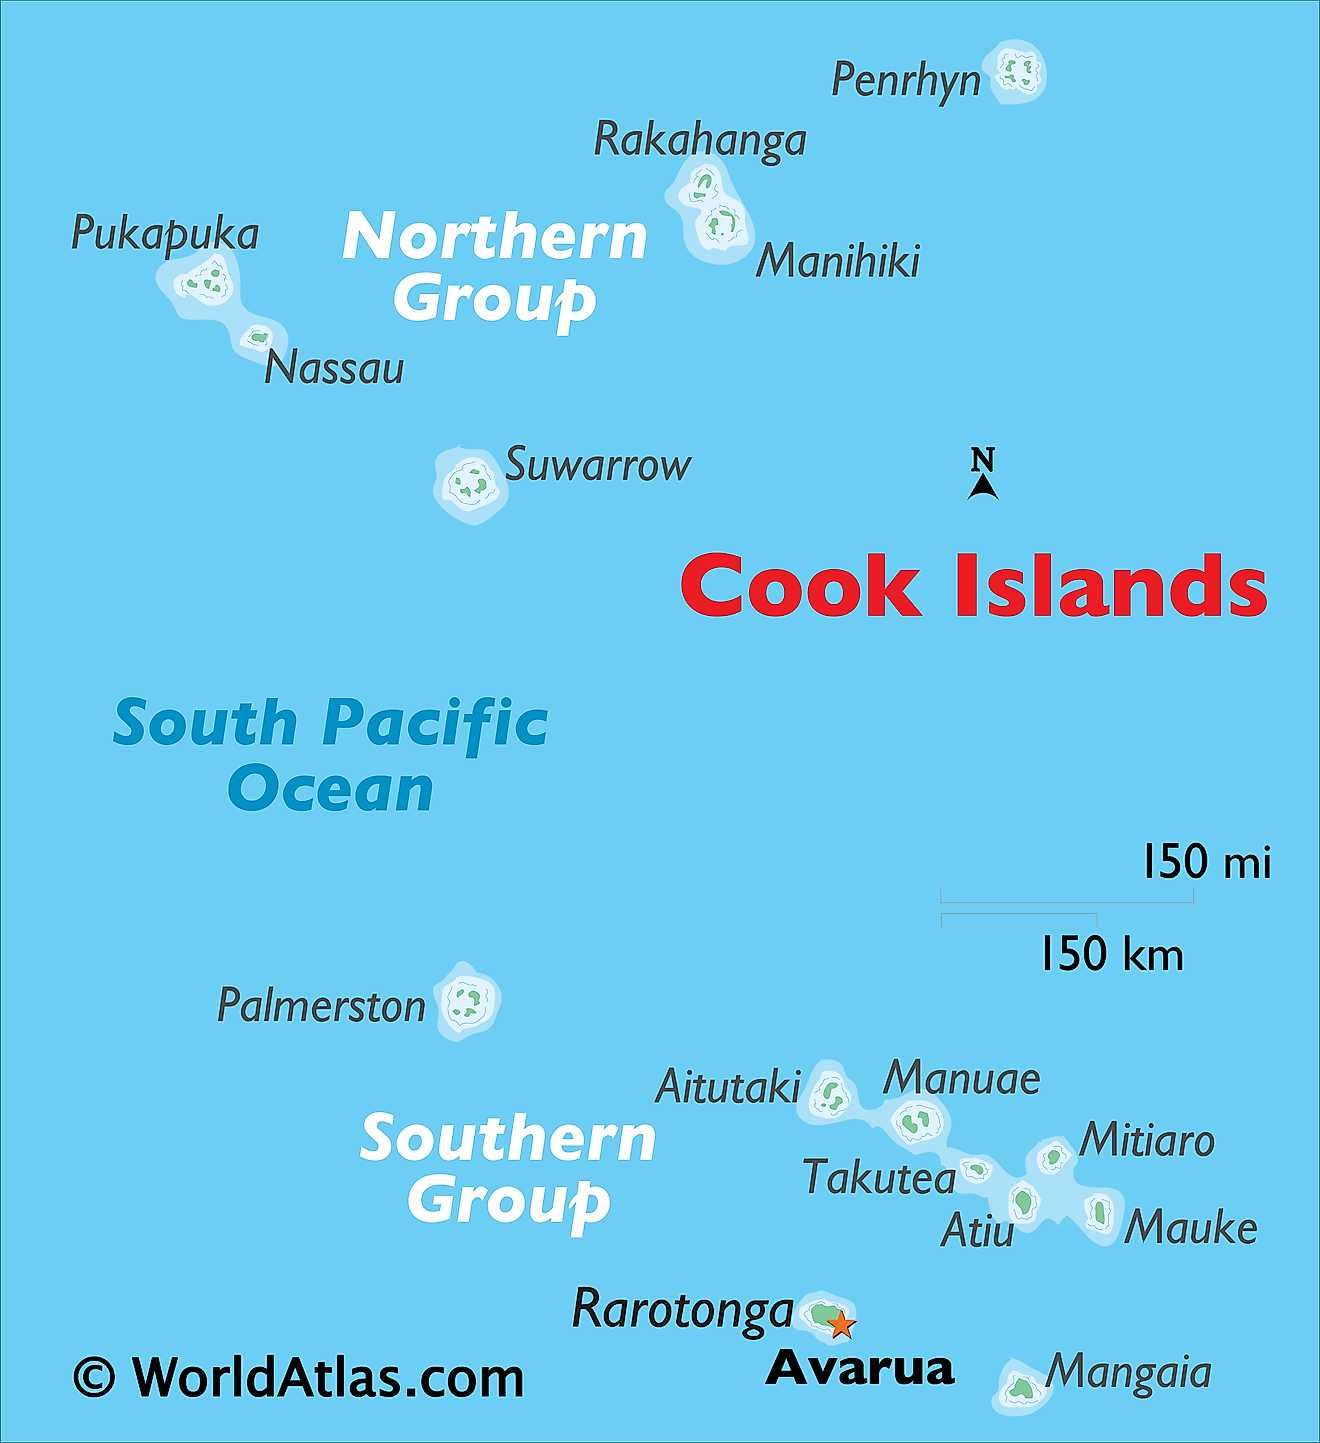 The physical map of Cook Islands showing the major islands of the island country.